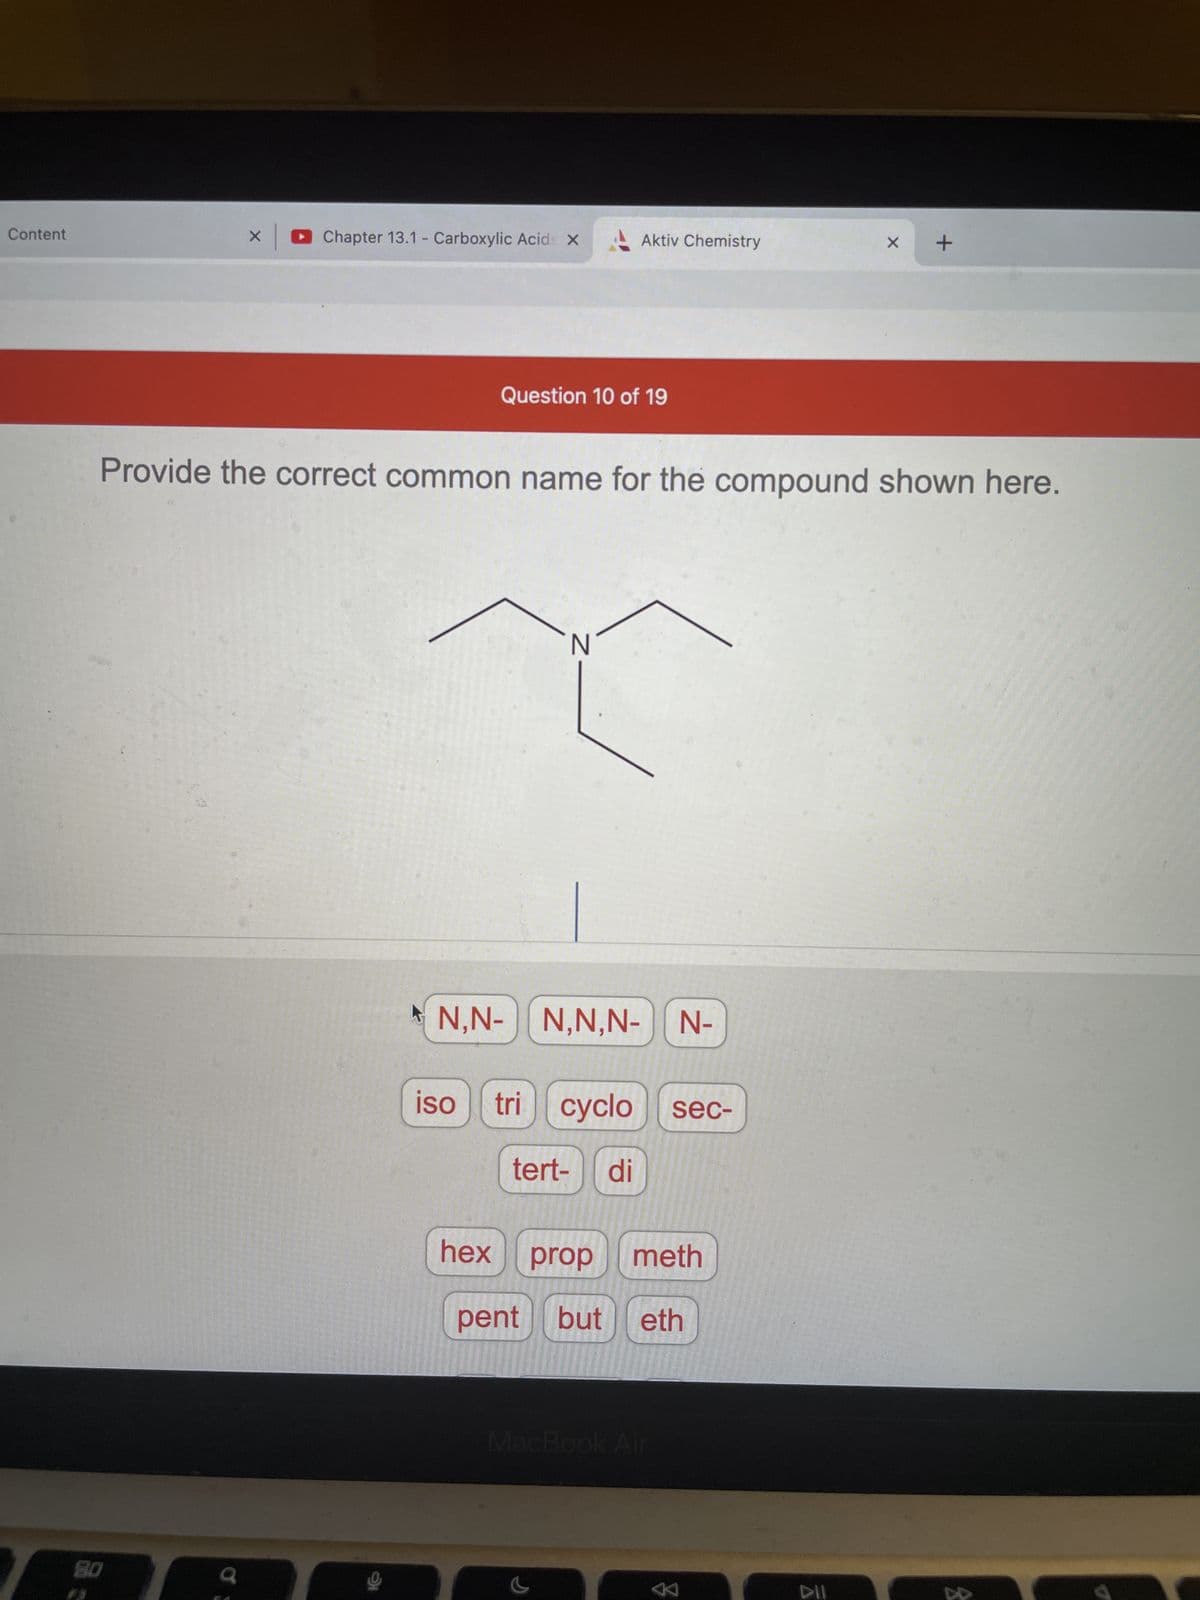 Content
Chapter 13.1 - Carboxylic Acids X
X +
Question 10 of 19
Provide the correct common name for the compound shown here.
N
N,N- N,N,N- | N-
iso
tri cyclo sec-
tert- di
hex prop meth
pent but eth
MacBook Air
X
80
Aktiv Chemistry
K
DII